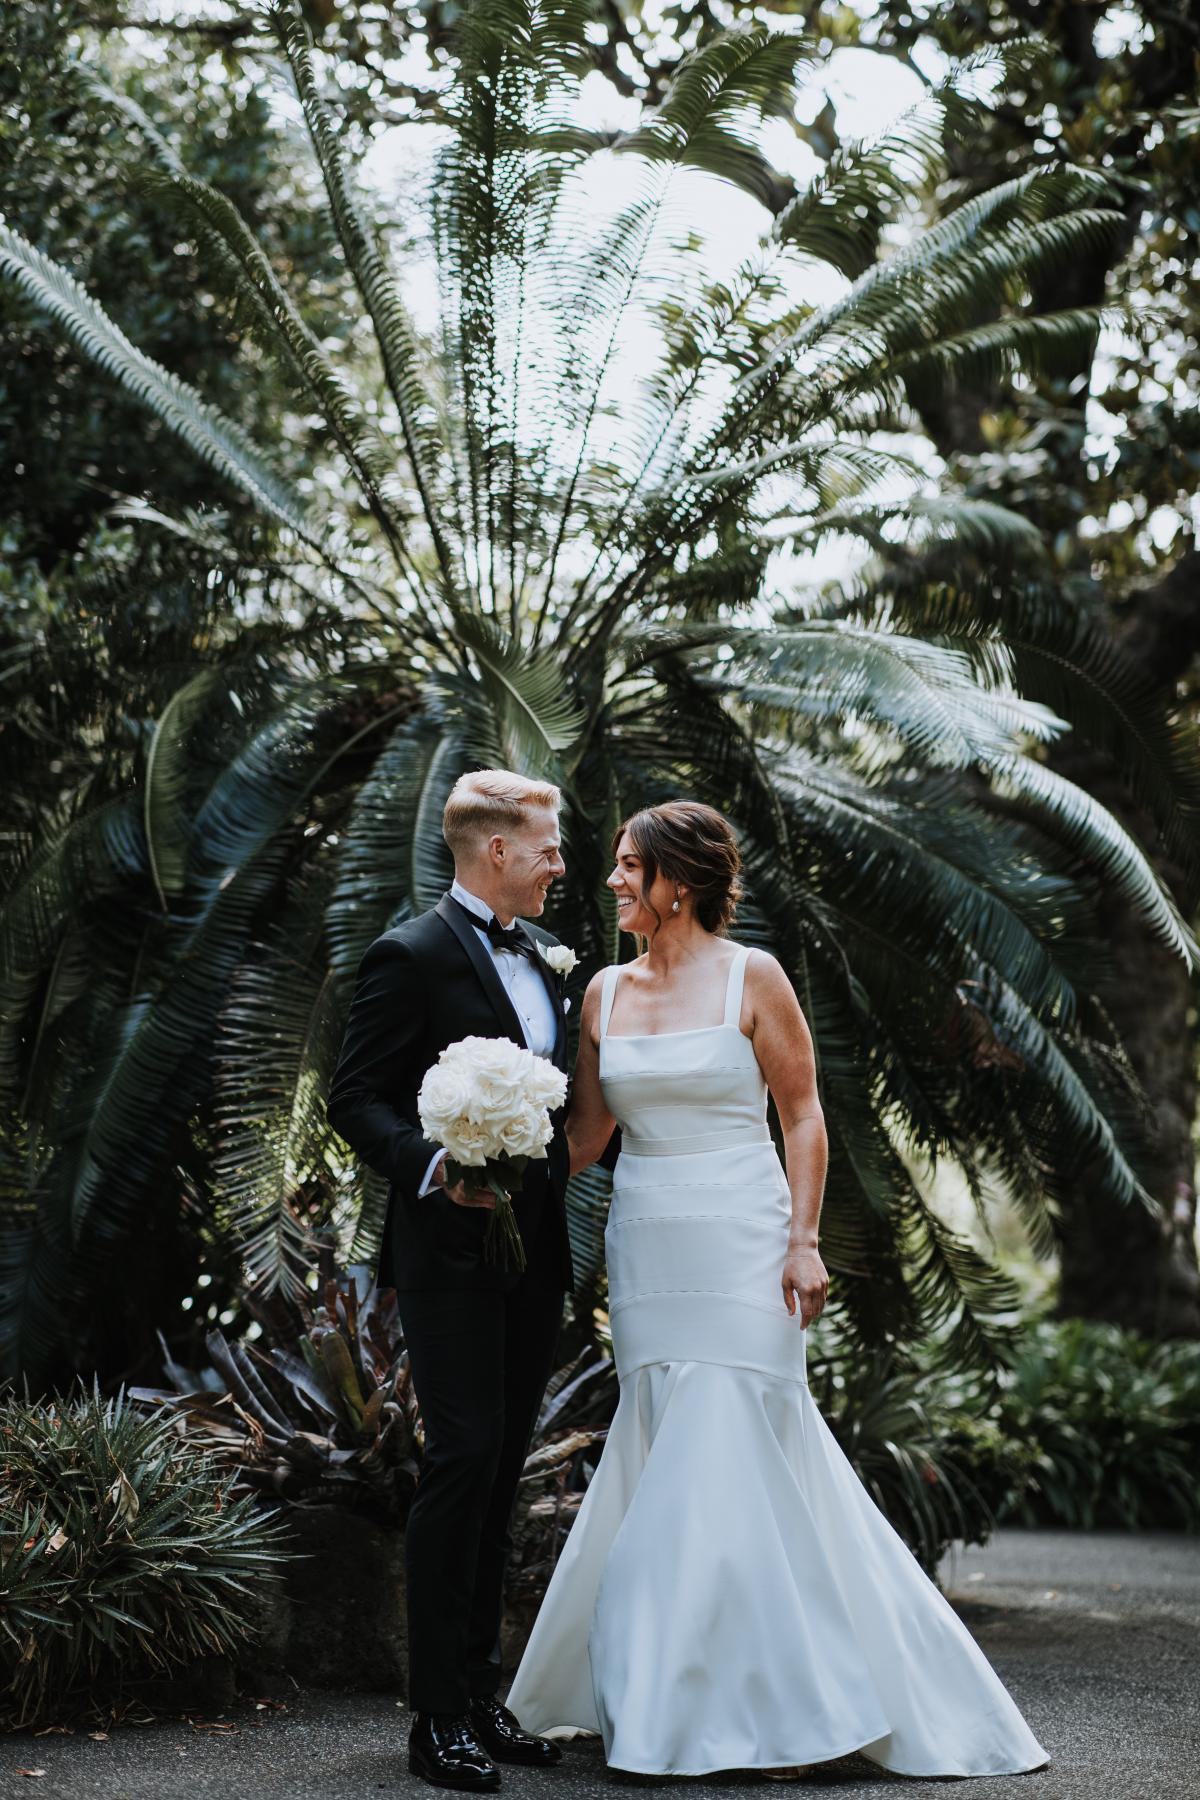 Real bride Emily and Dan share a moment in from of the palms. She wears the Violet dress by KWH, a square neckline dress with center split.